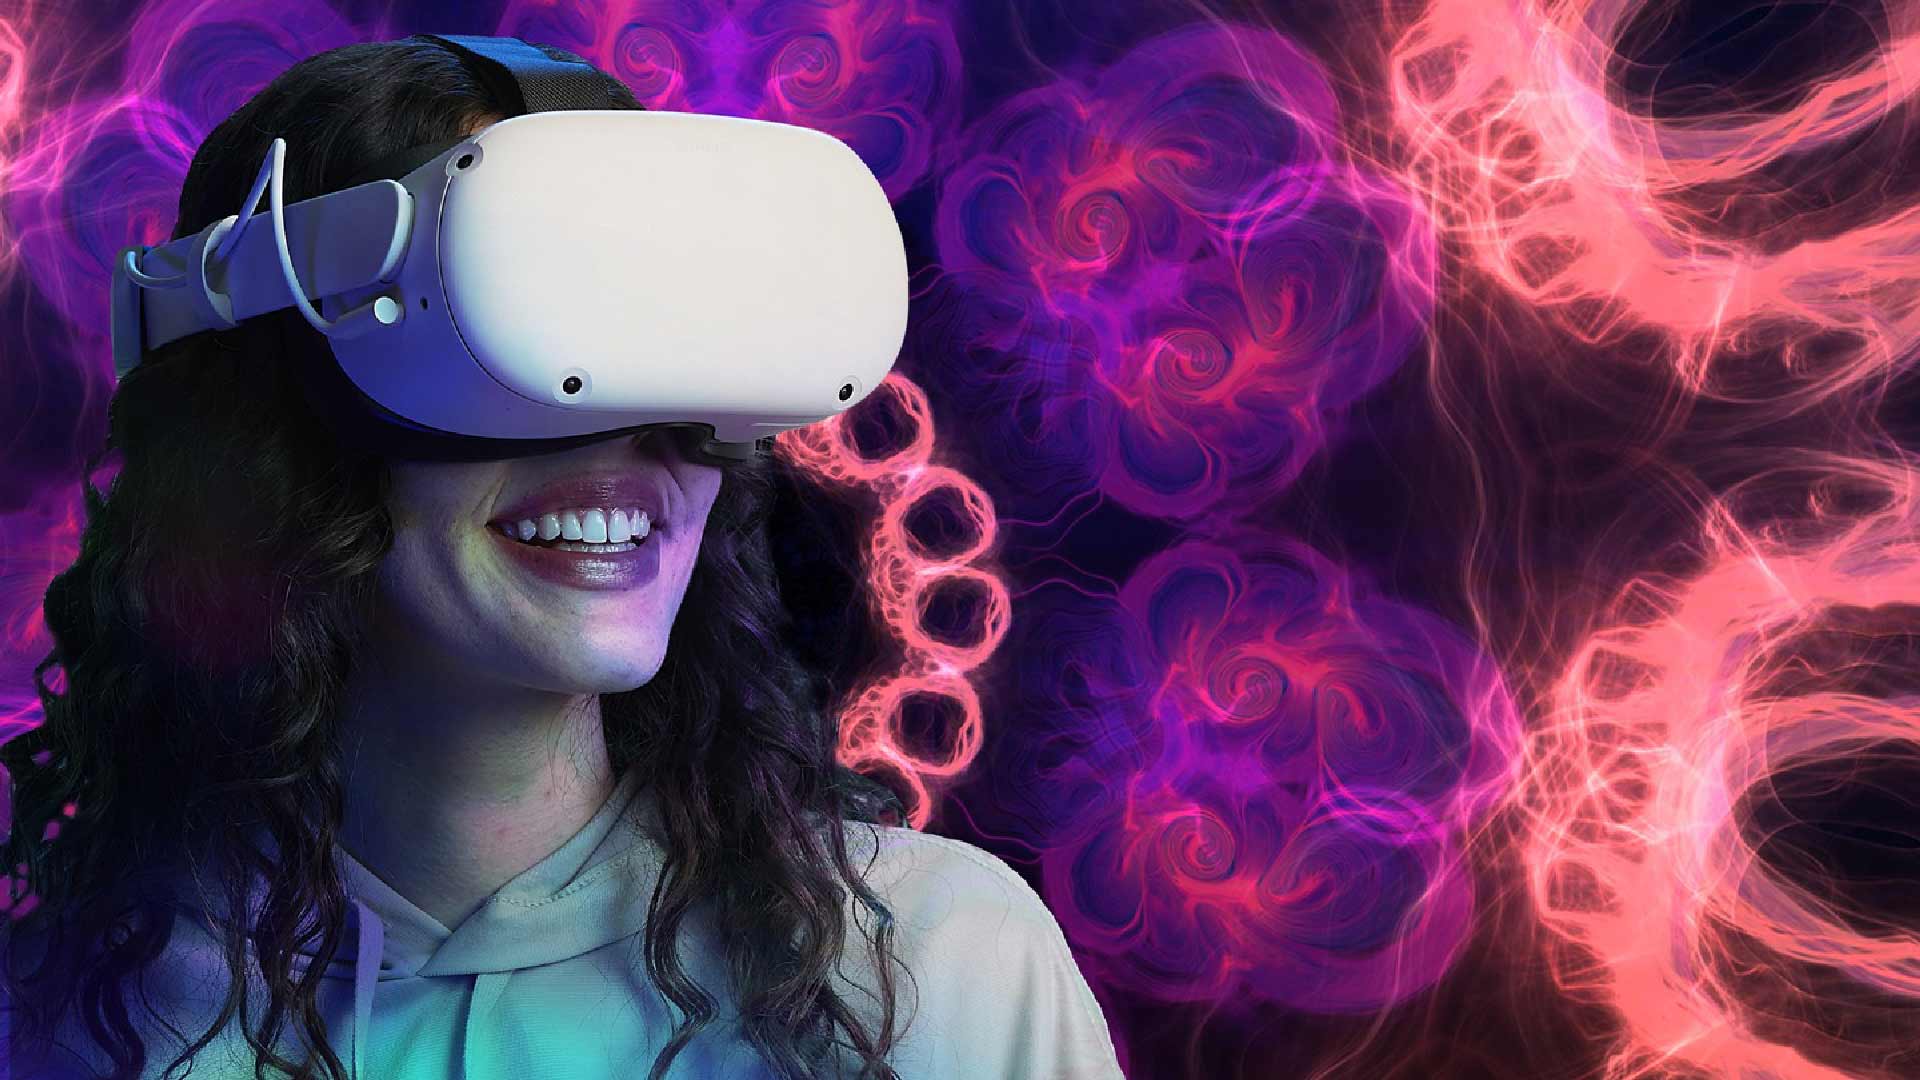 Amazon, Qualcomm & More Invest $11.2M in TRIPP to Build the “mindful metaverse”